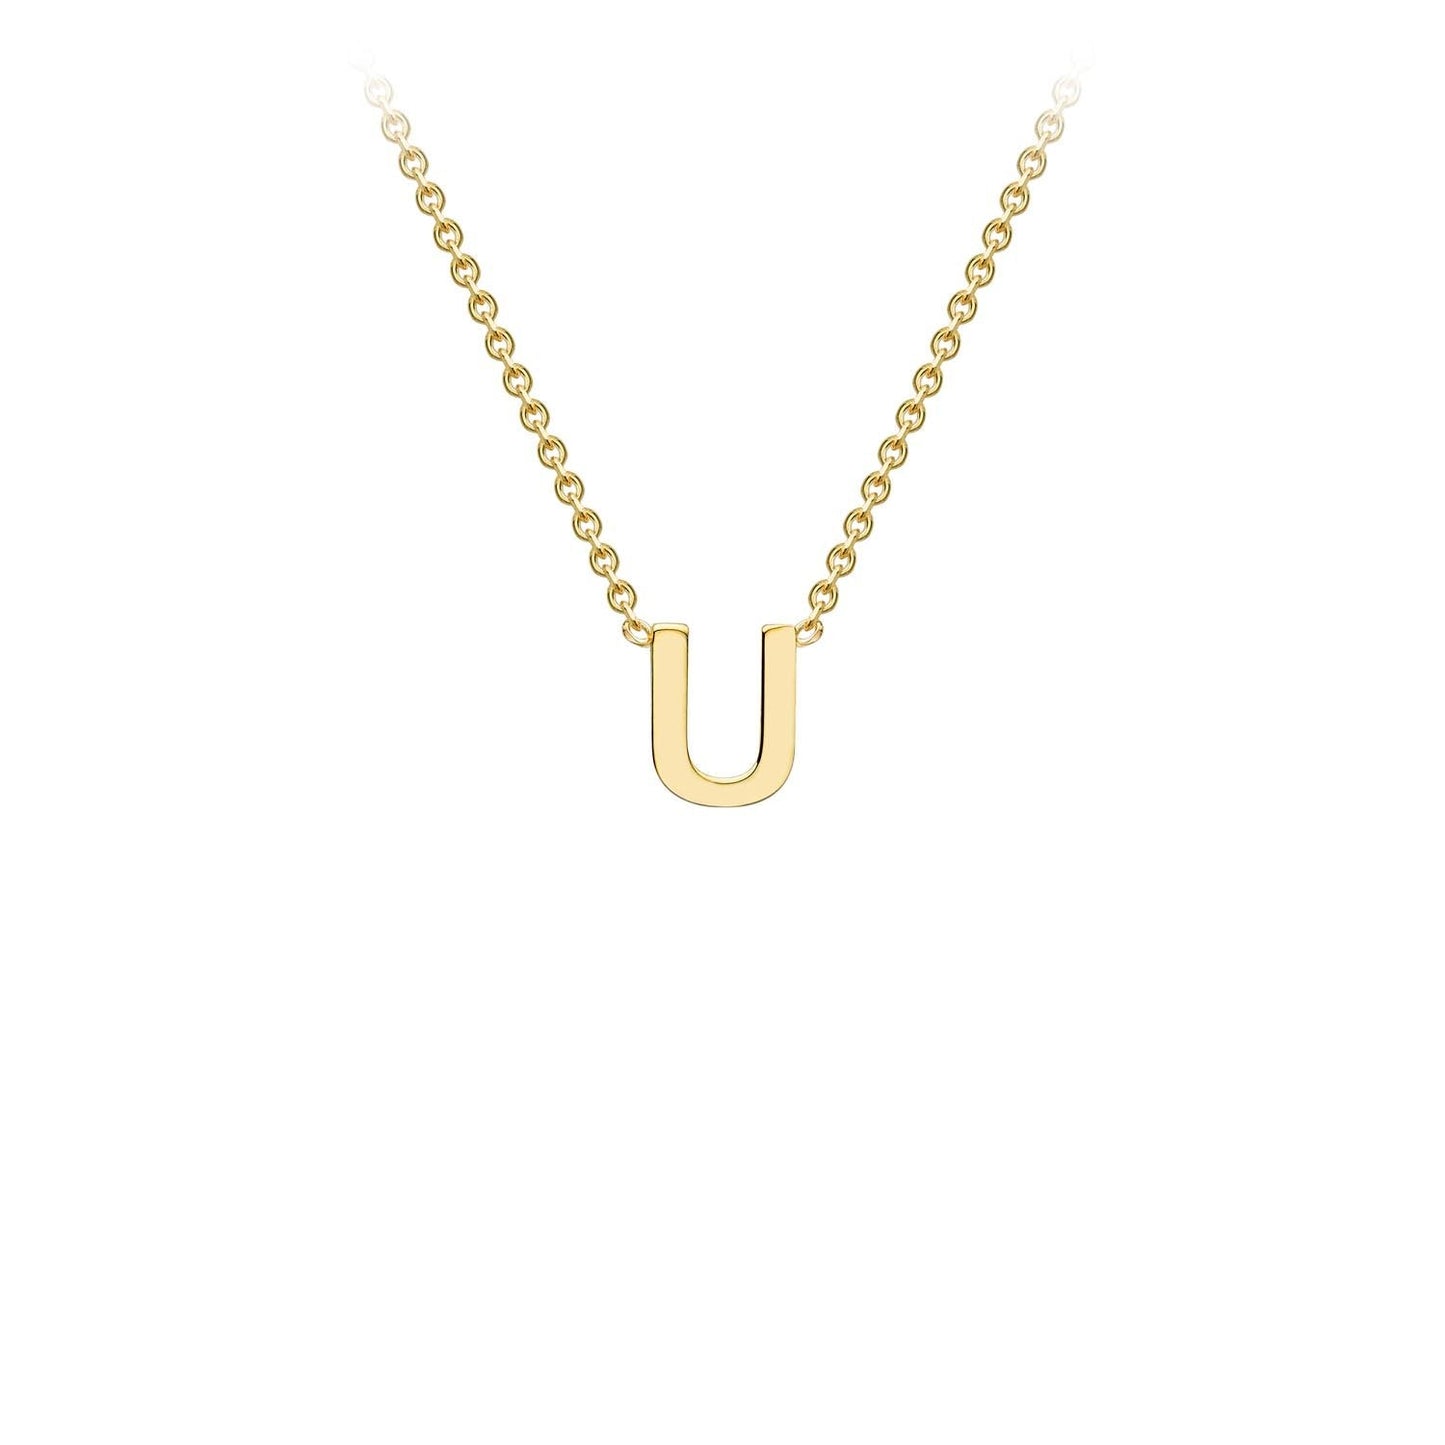 9K Yellow Gold 'U' Initial Adjustable Letter Necklace 38/43cm